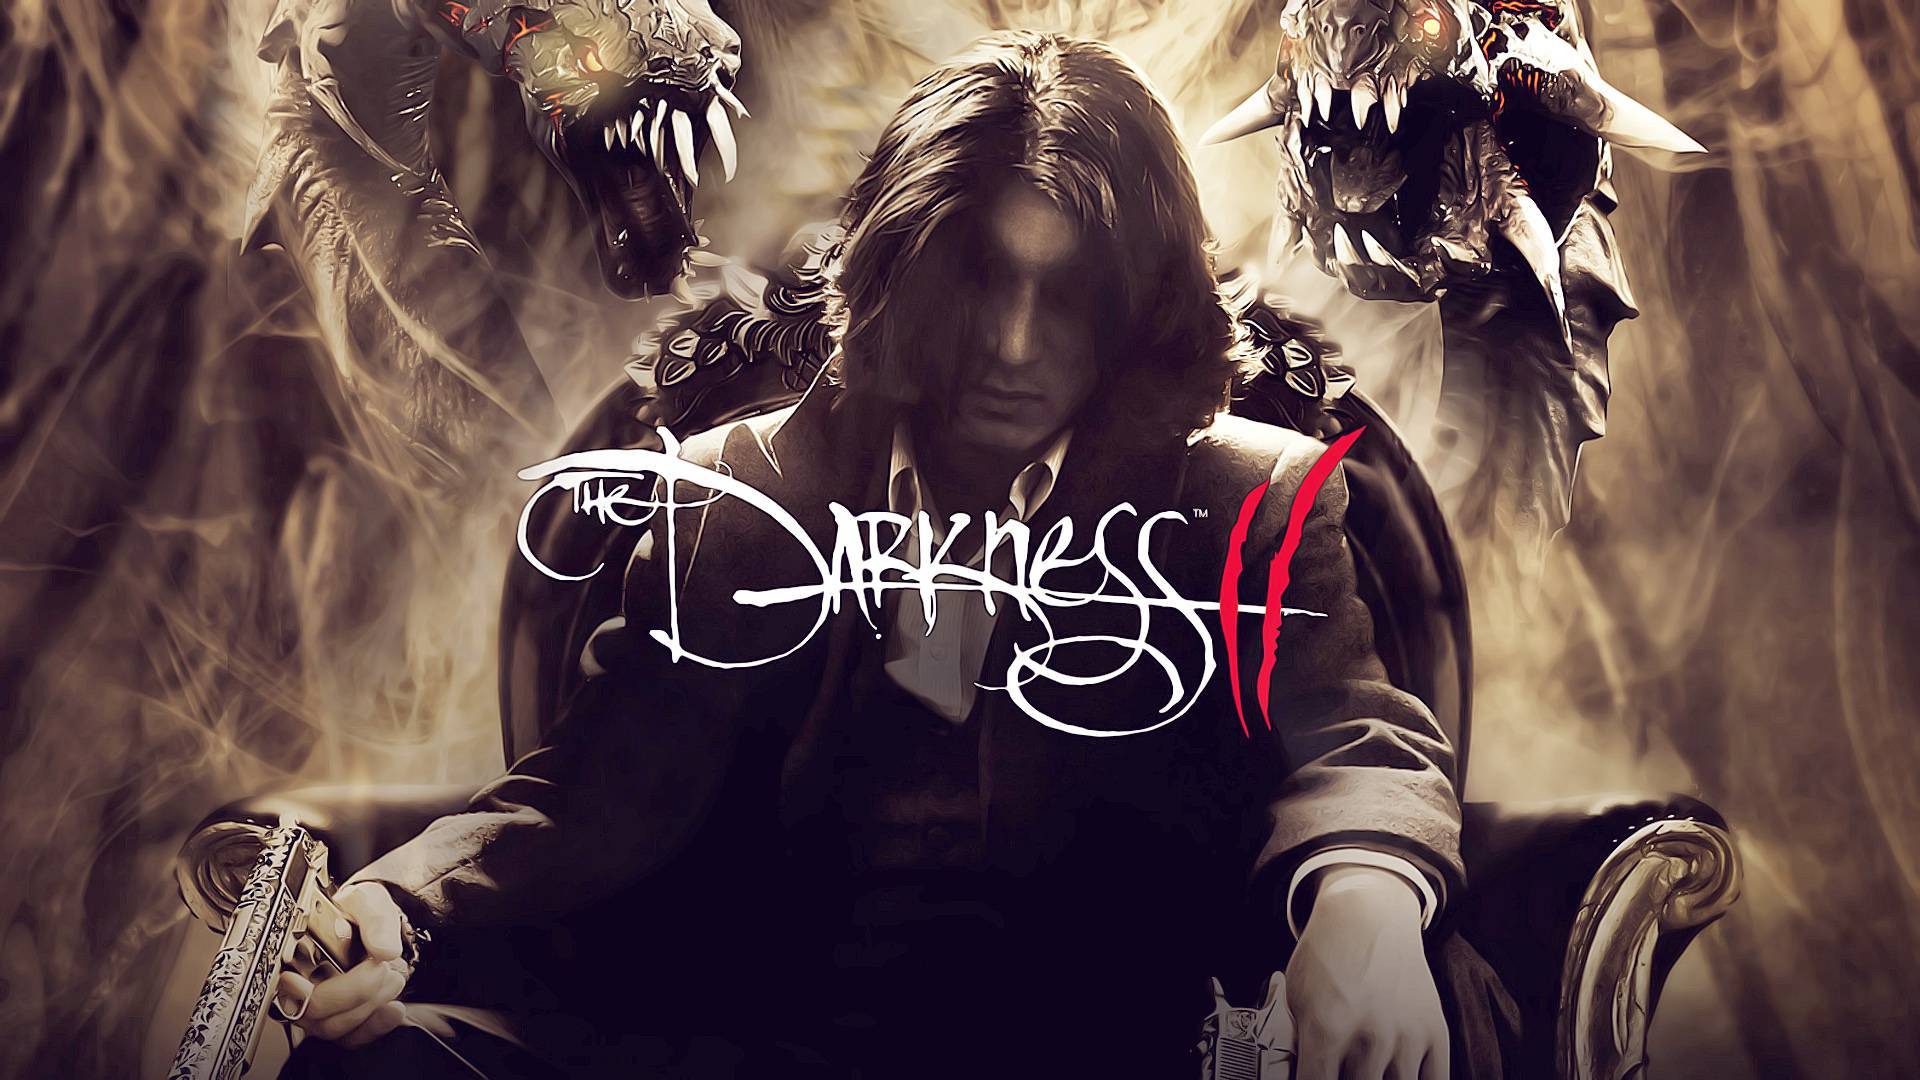 The Darkness 2 Wallpaper in HD